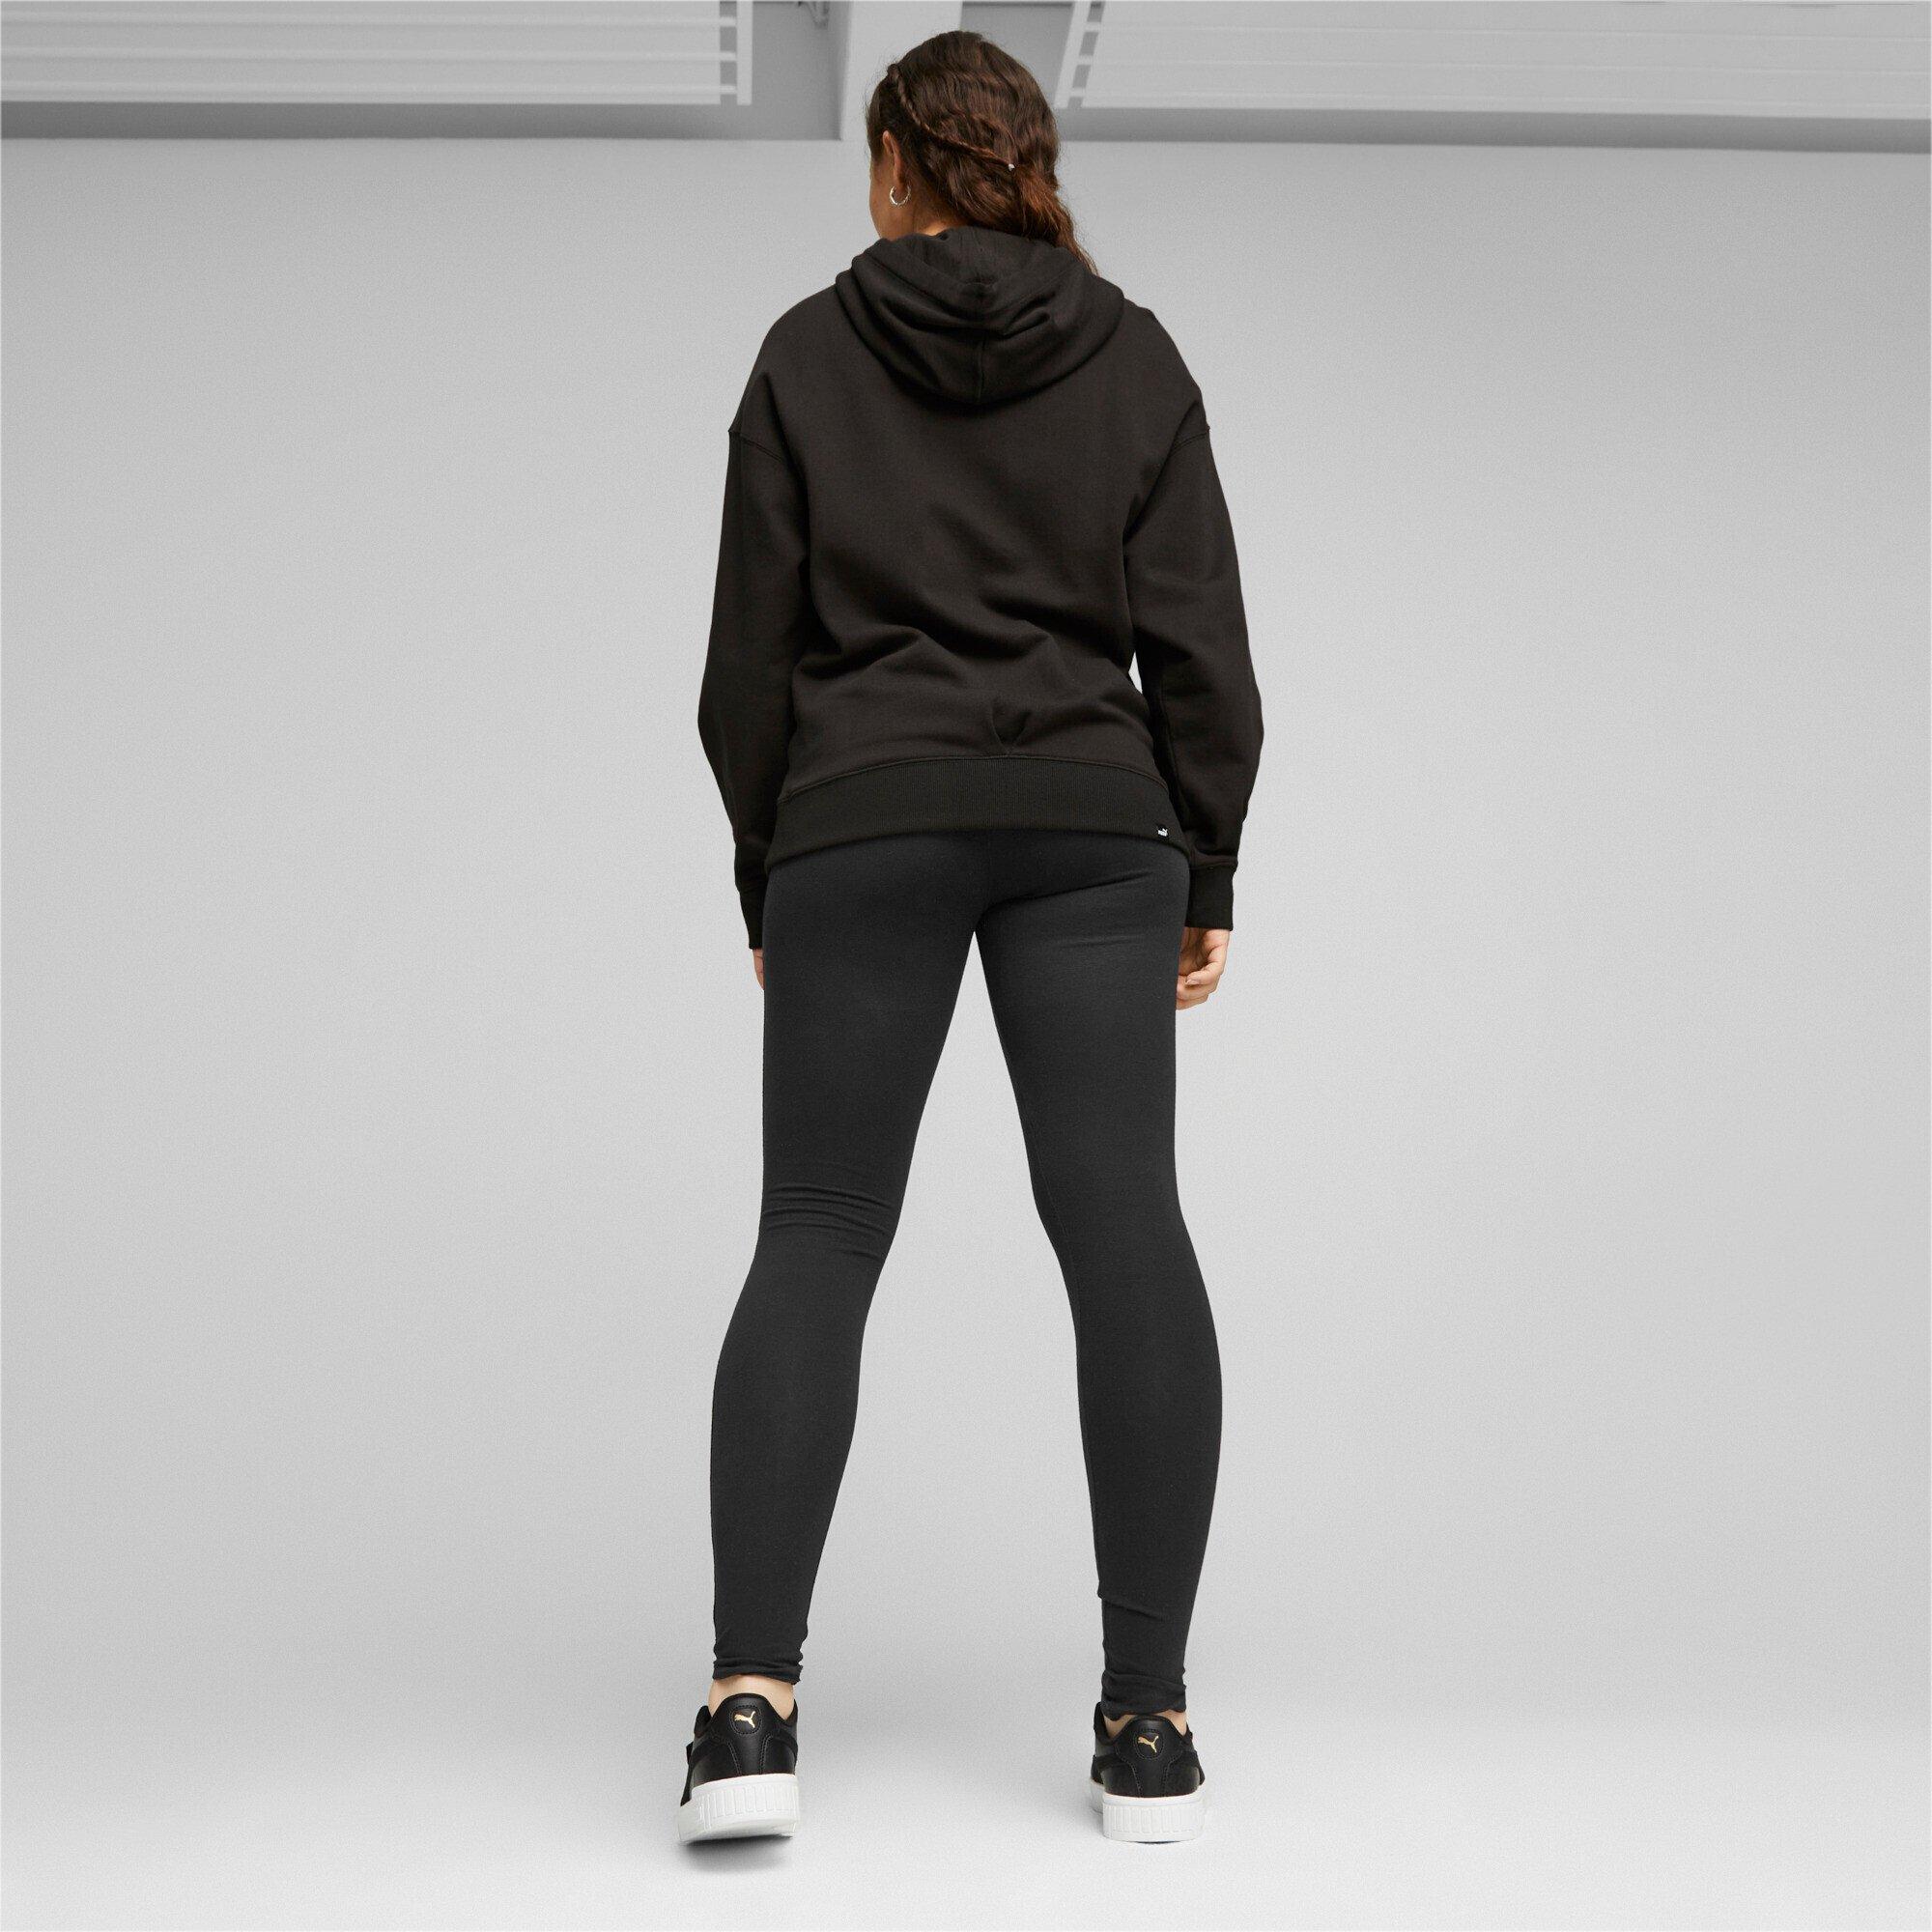 PUMA  Leggings mit hoher Taille,   Her 